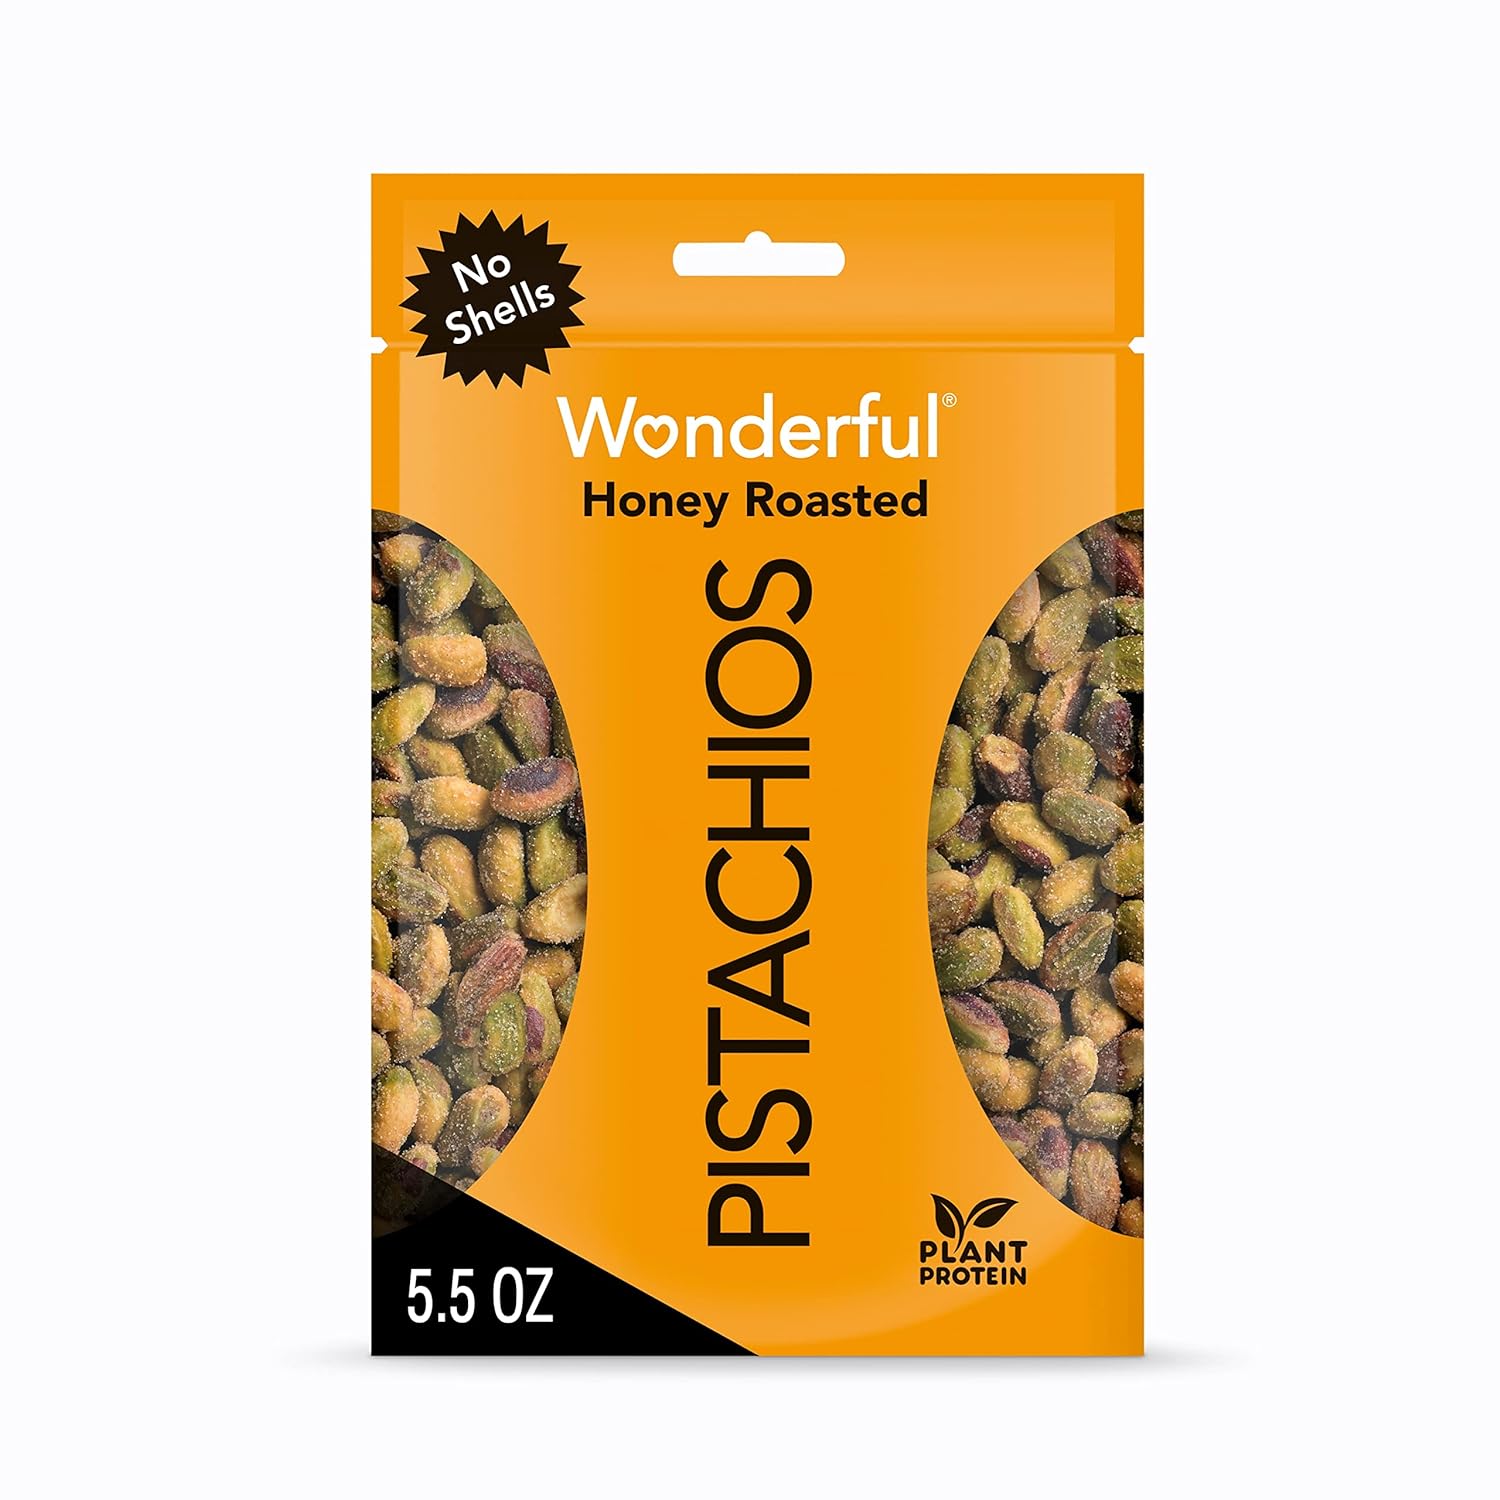 5.5-Oz Wonderful Honey Roasted Pistachios (No Shells) $3.04 w/ S&S + Free Shipping w/ Prime or on orders over $35